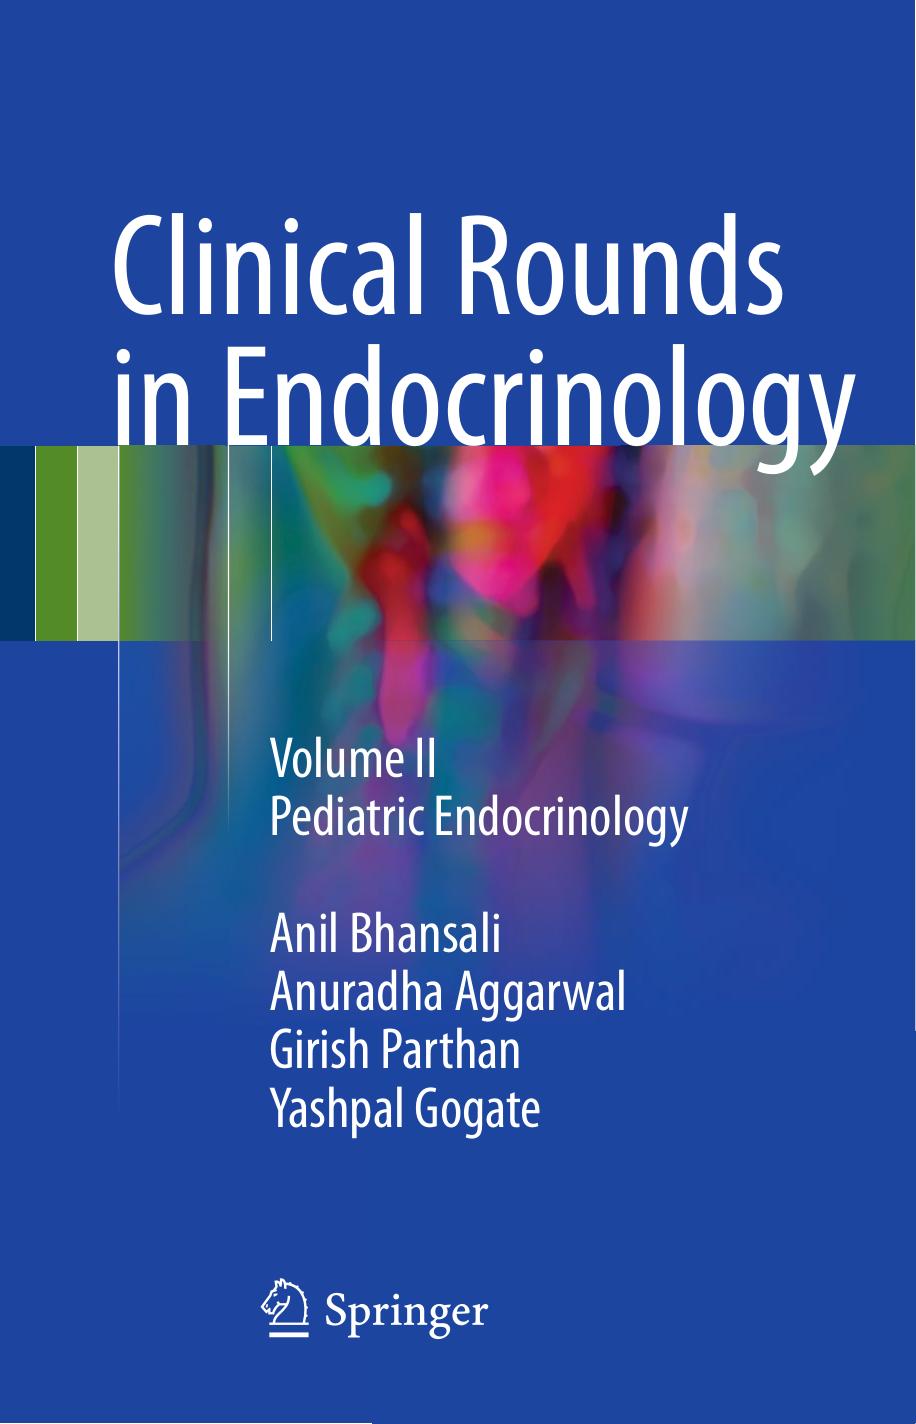 CLINICAL ROUND IN ENDOCRINOLOGY 2016